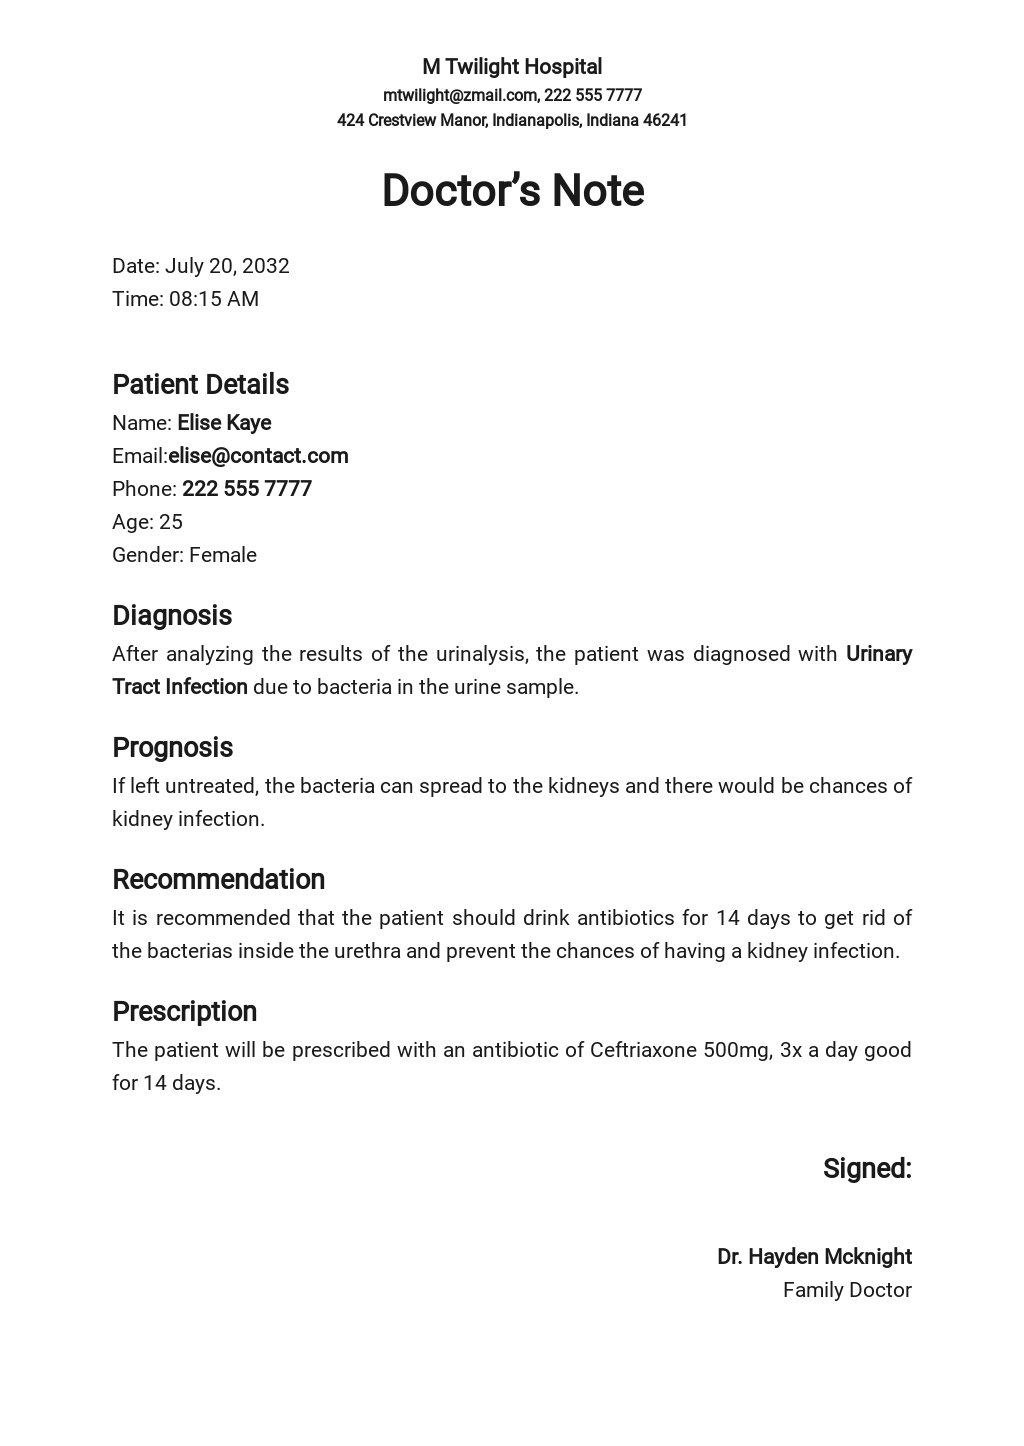 Doctors Note For Work Template - Word, Apple Pages, PDF  Template.net With Hospital Note For Work Template